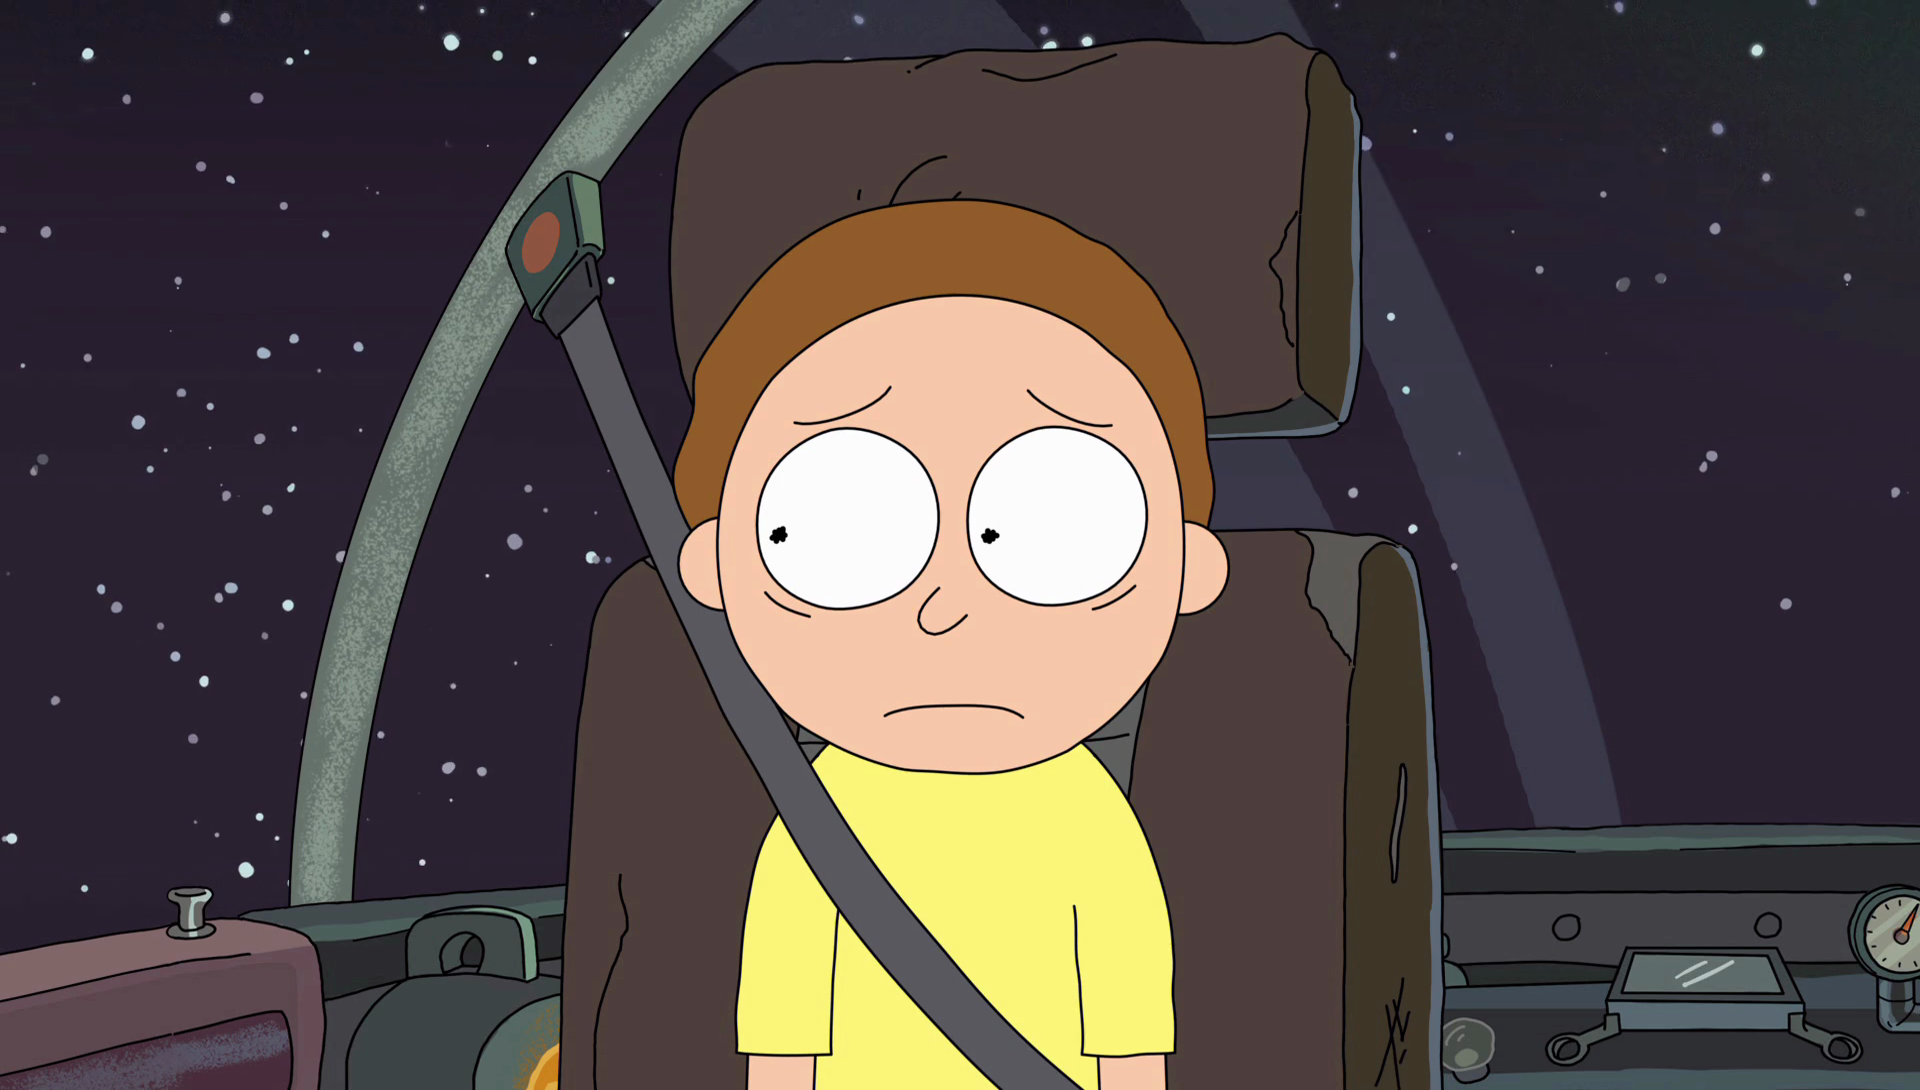 Image S2e2 Morty Still Sadpng Rick And Morty Wiki Fandom Powered 7928